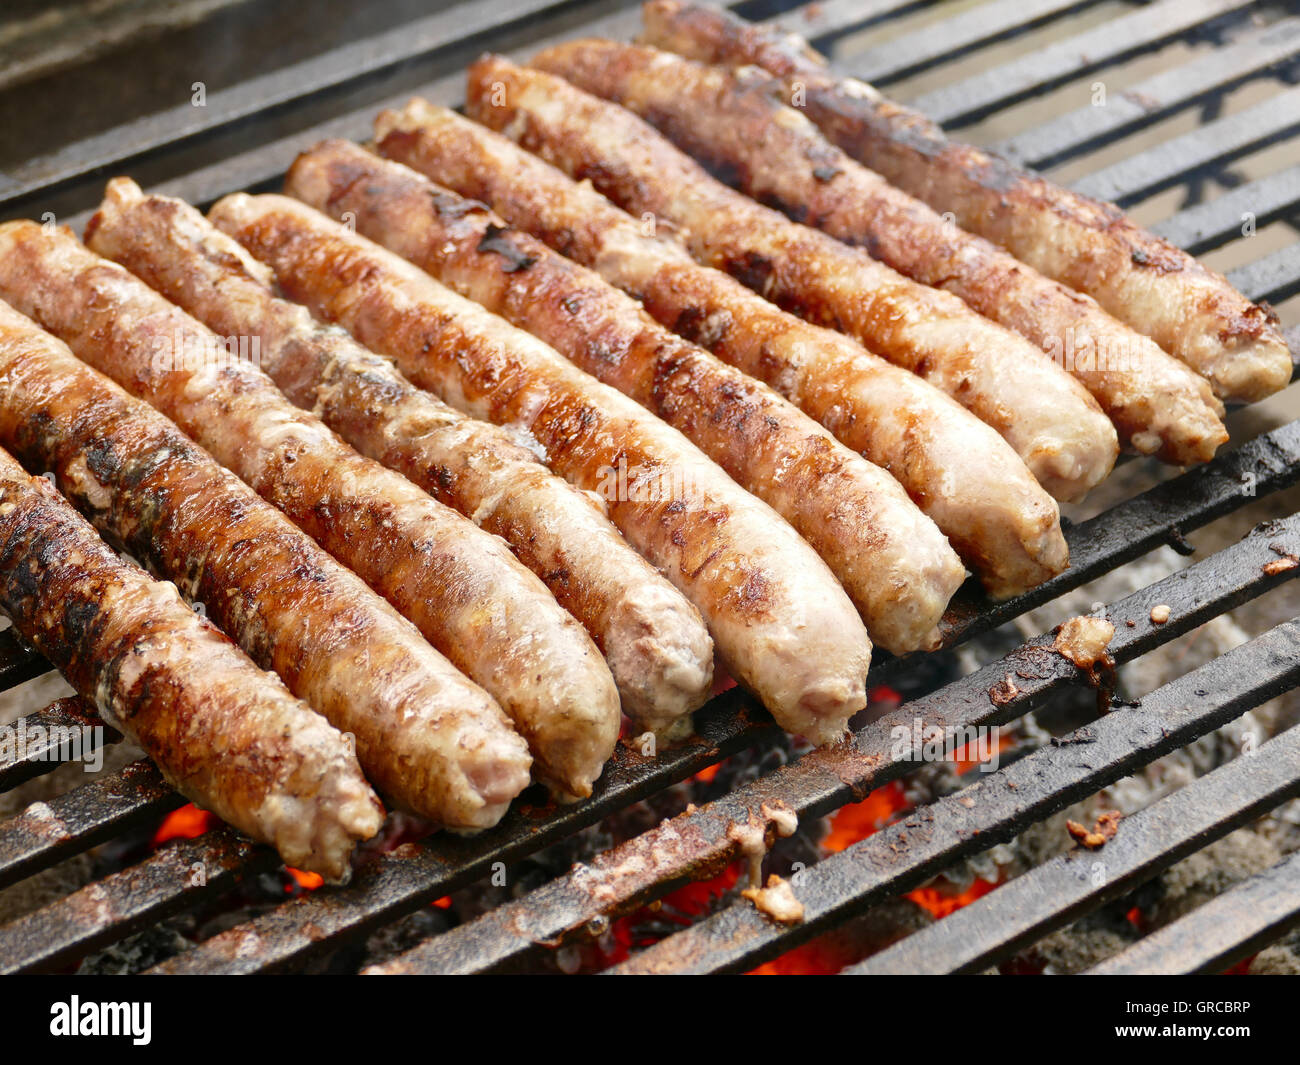 Grill Specialties High Resolution Stock Photography and Images - Alamy